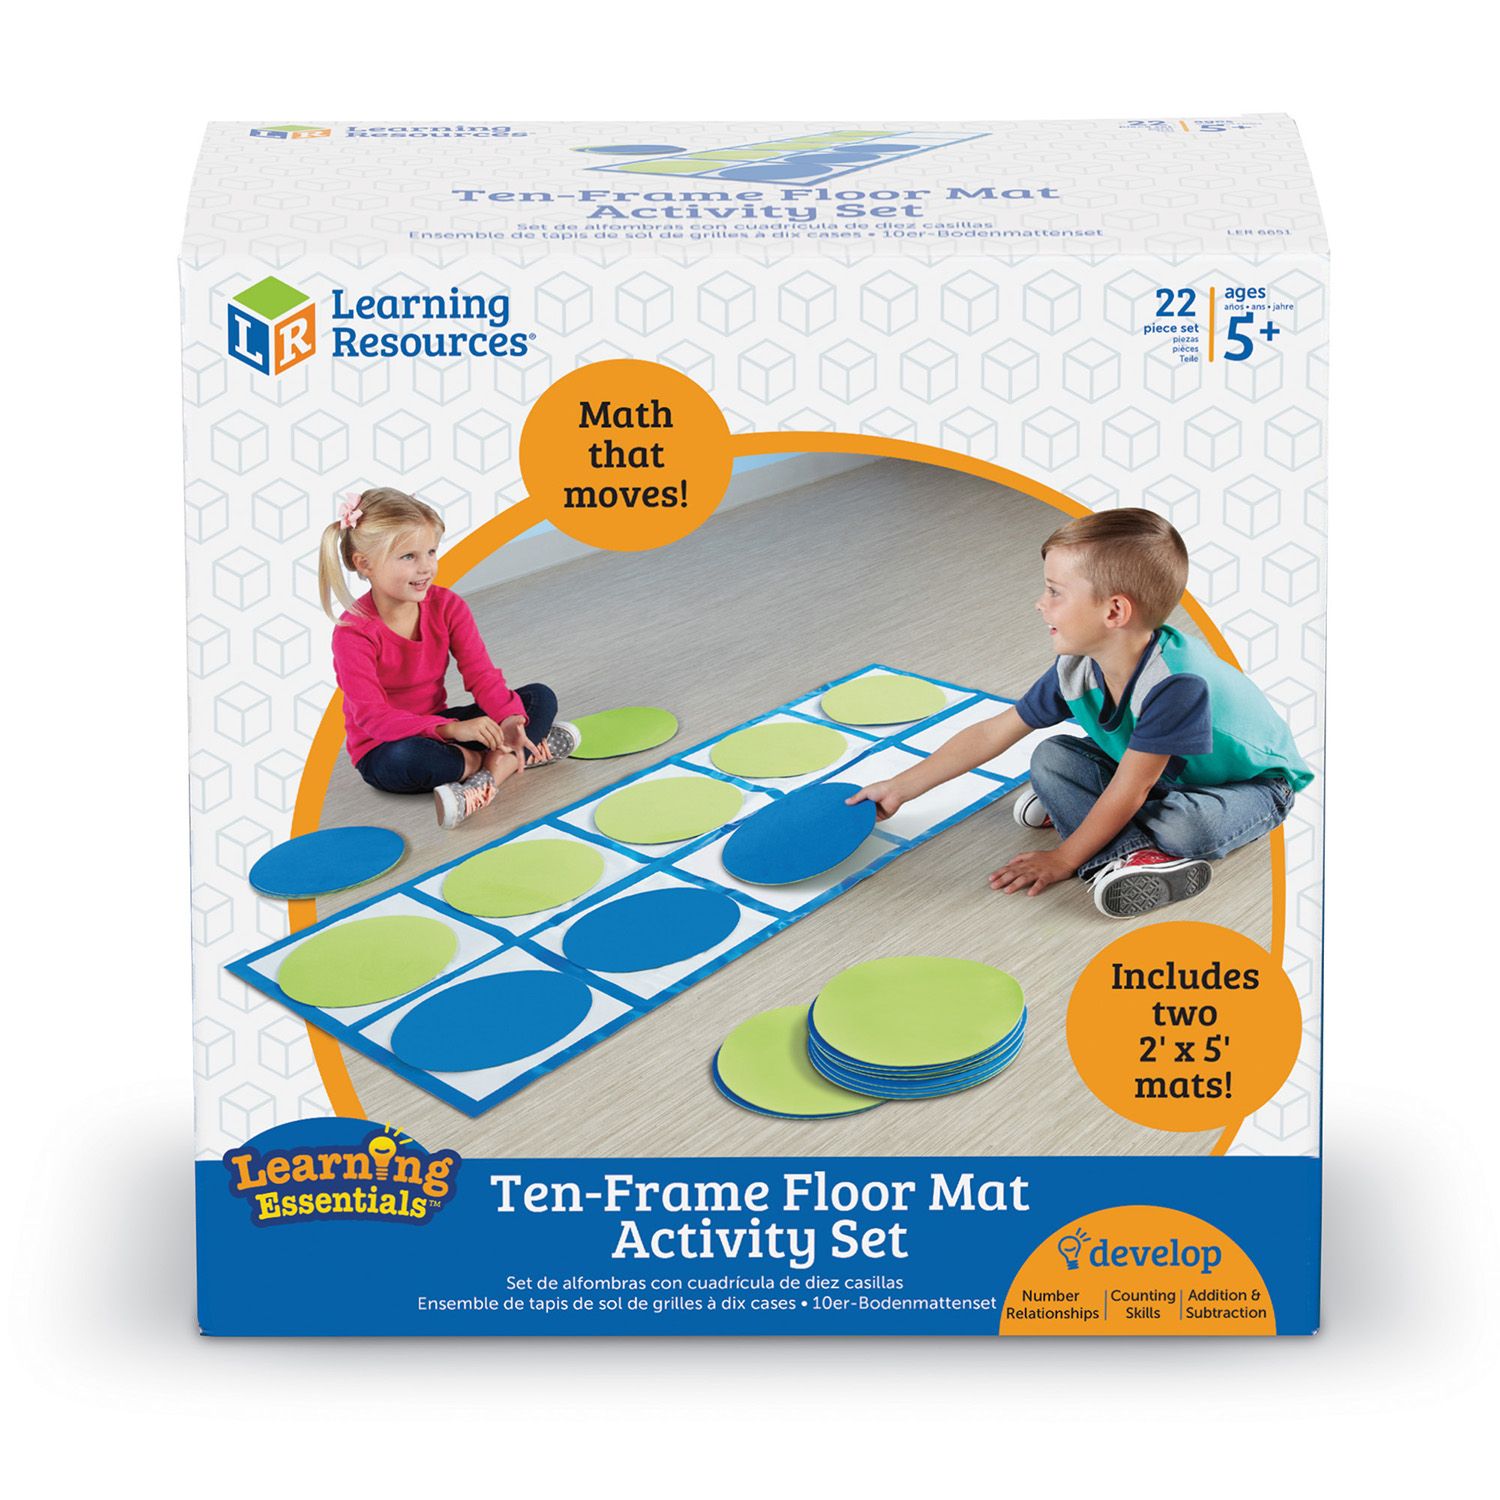 Image for Learning Resources Ten-Frame Floor Mat Activity Set at Kohl's.